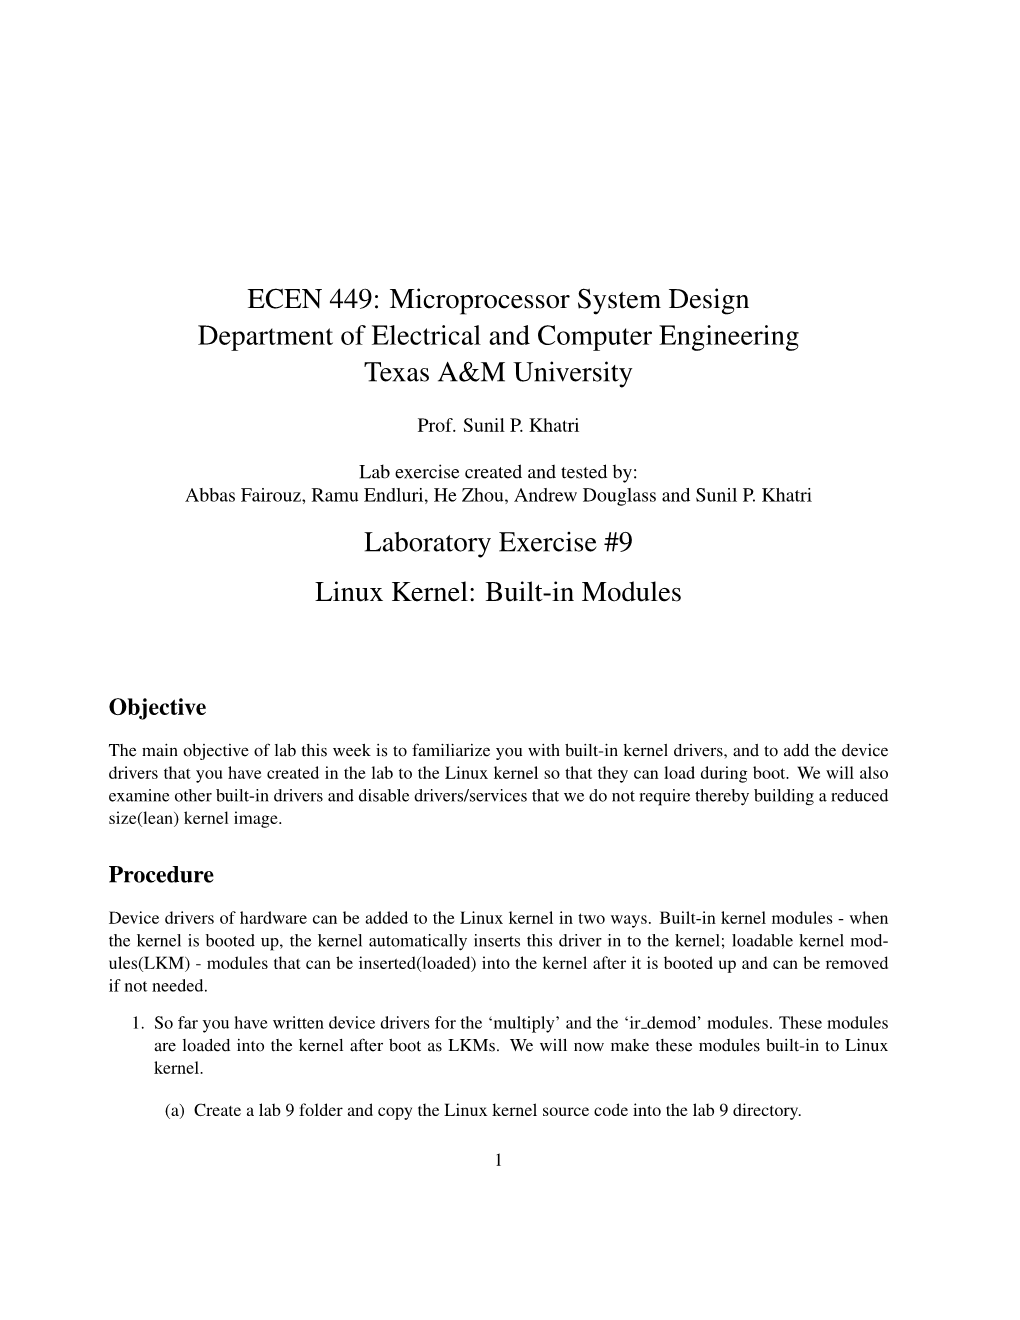 ECEN 449: Microprocessor System Design Department of Electrical and Computer Engineering Texas A&M University